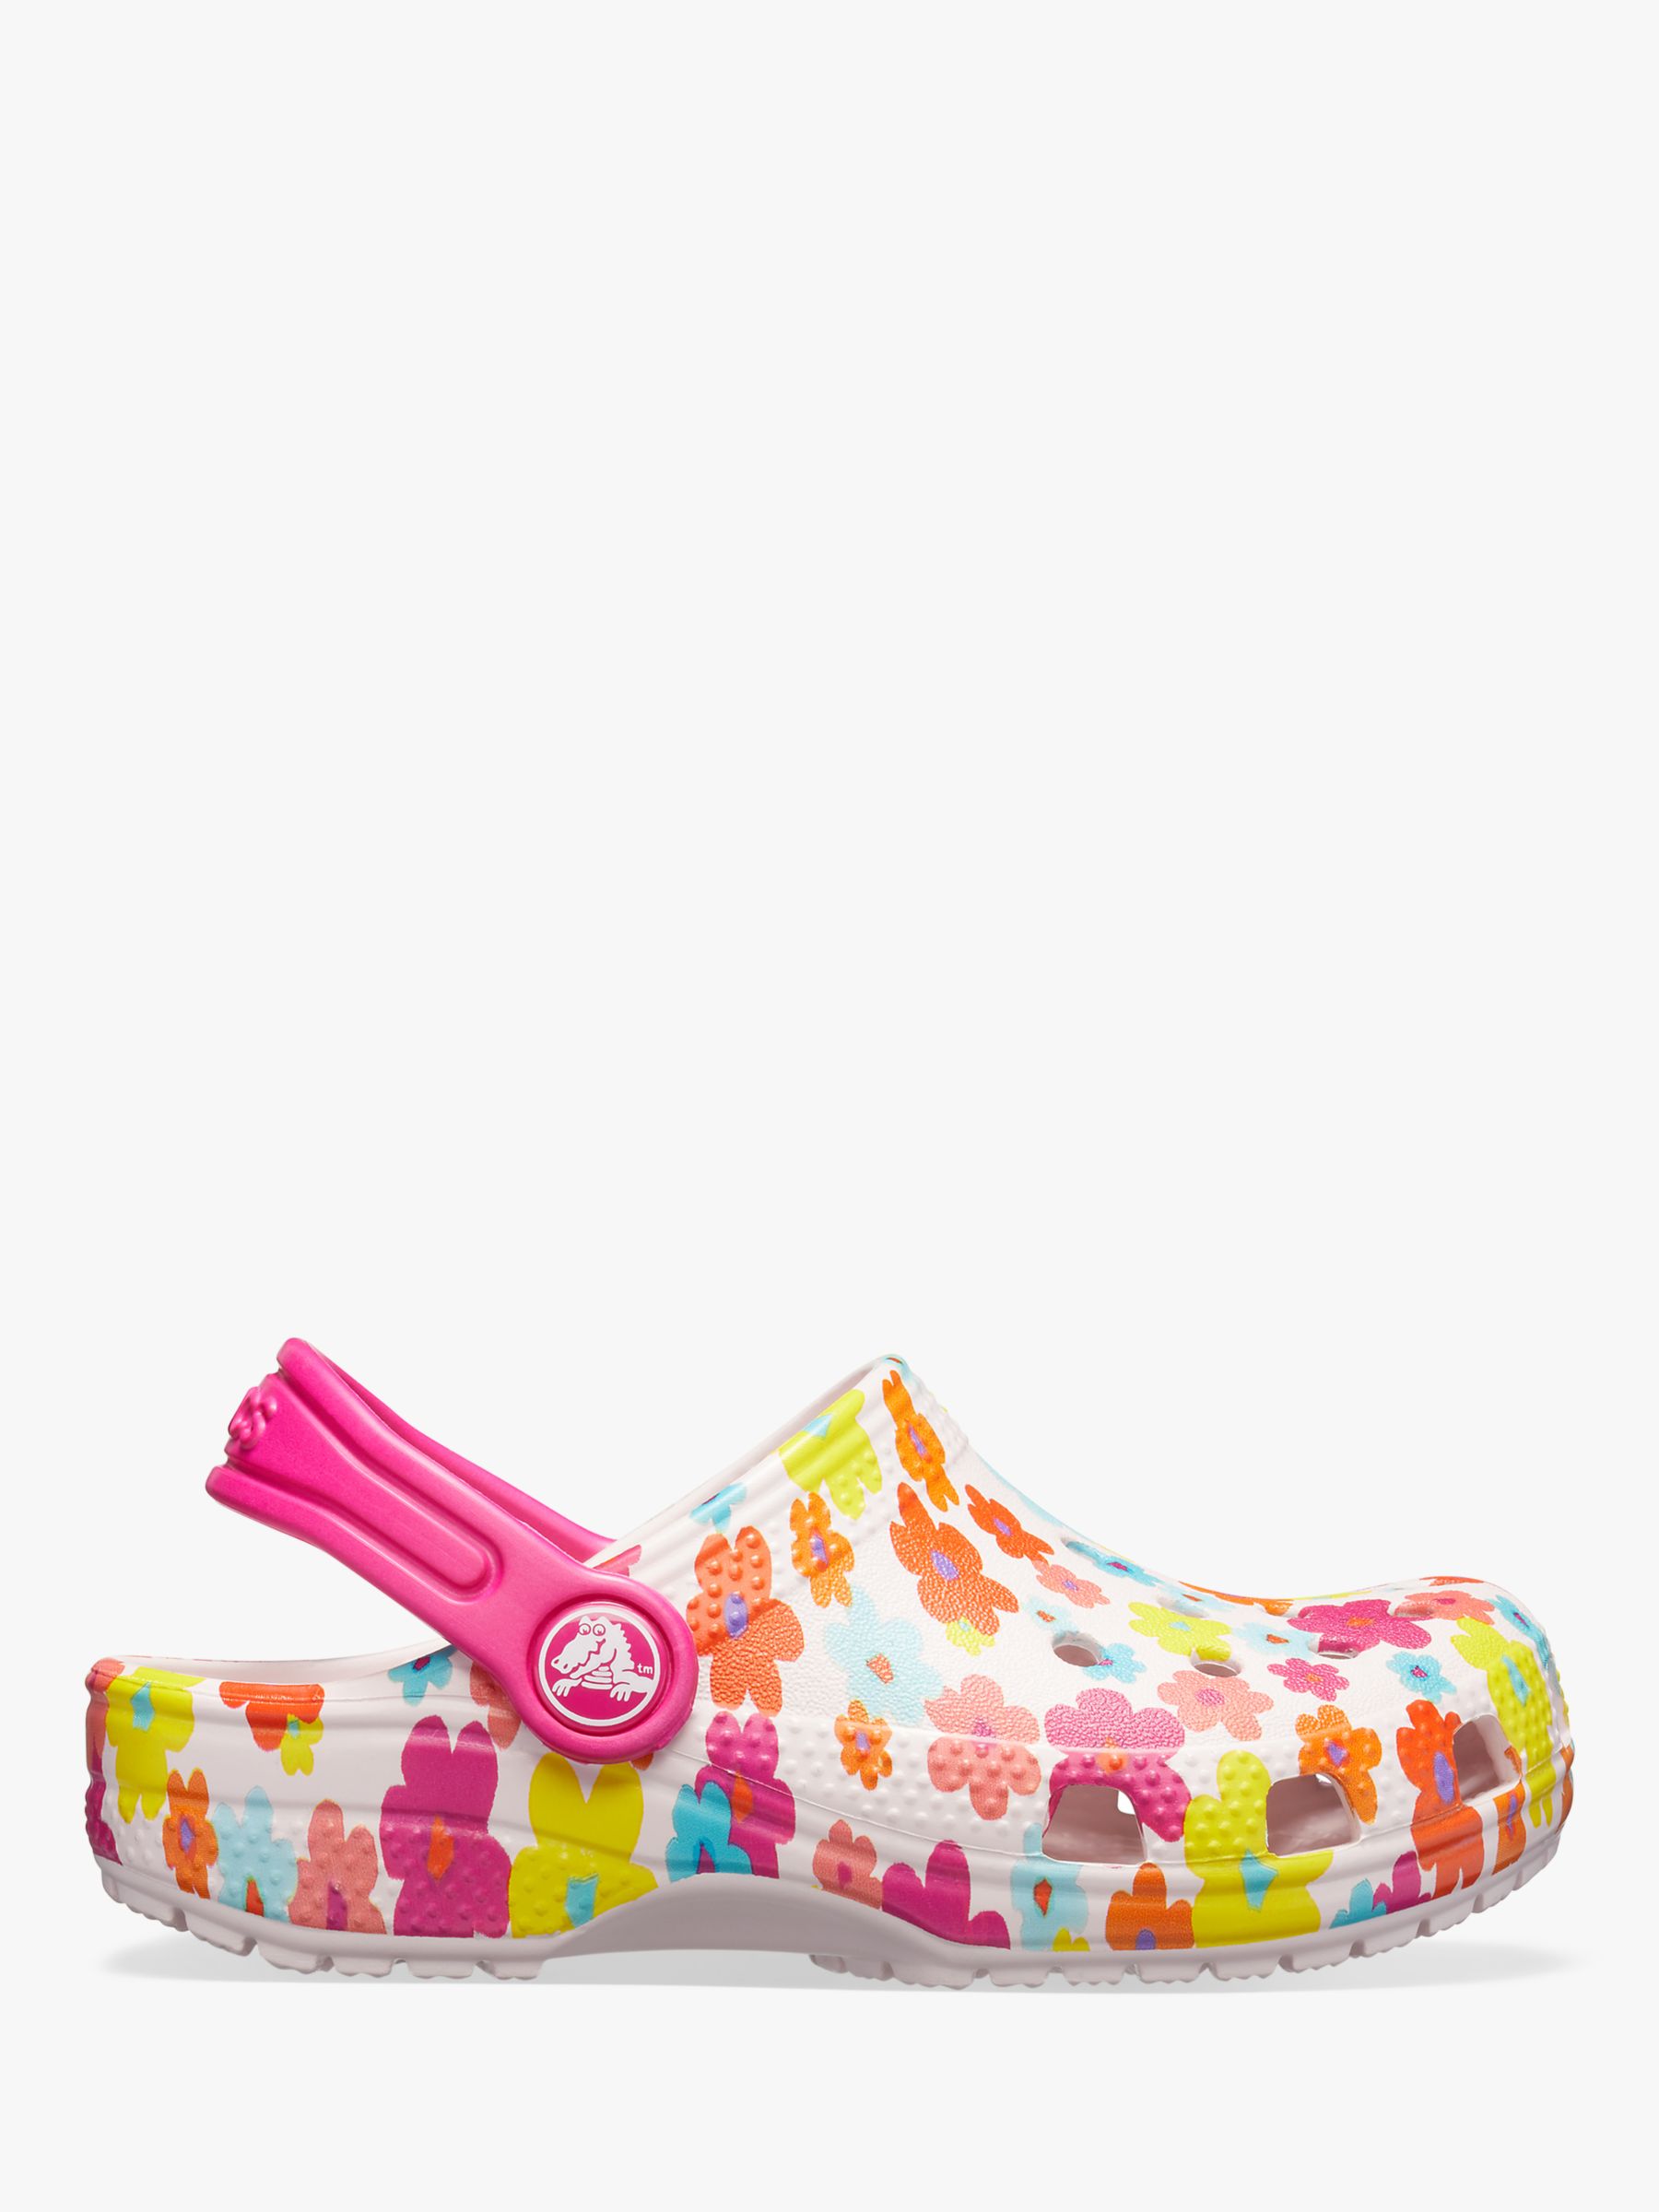 pink crocs with flowers